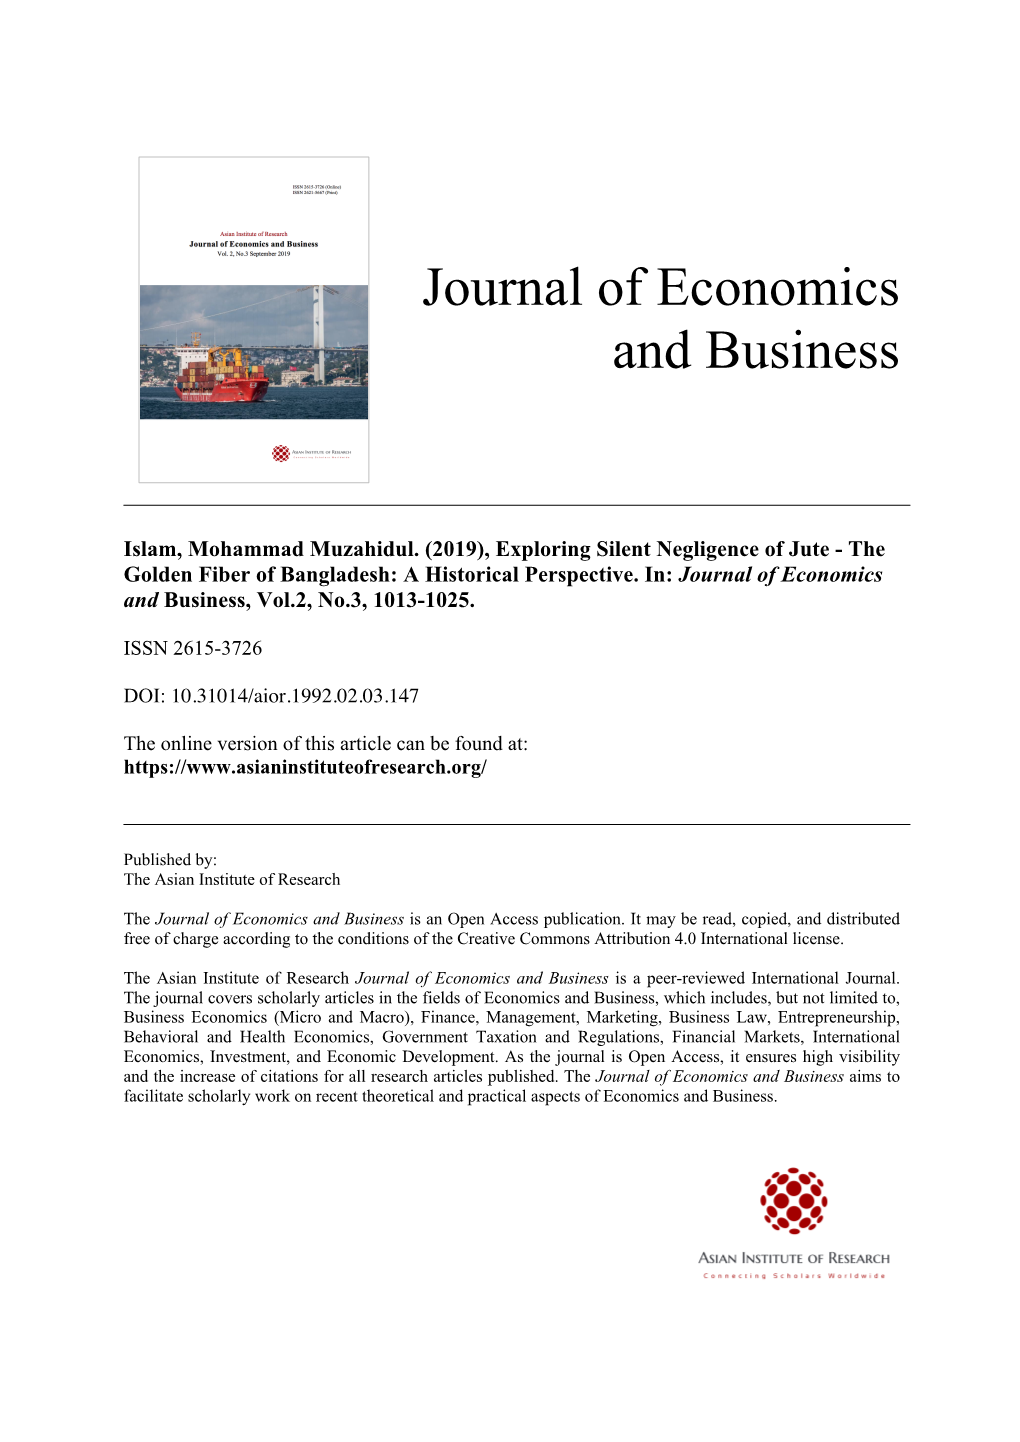 Journal of Economics and Business